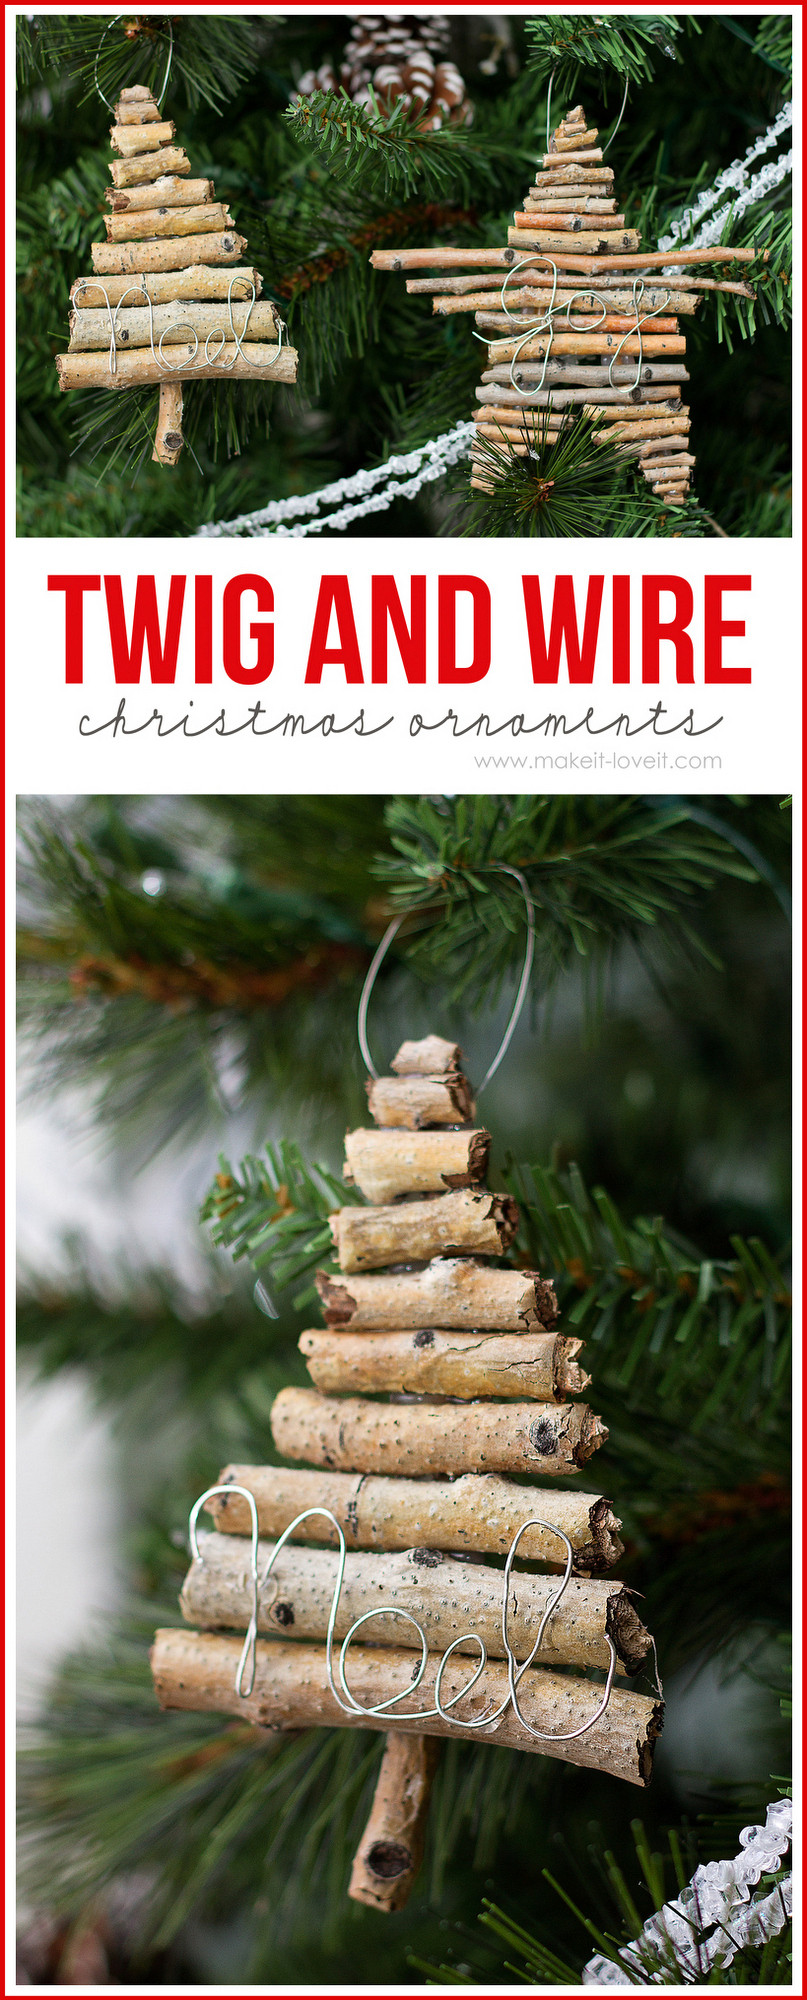 Easy DIY Christmas Ornaments
 Twig and Wire Christmas Ornaments